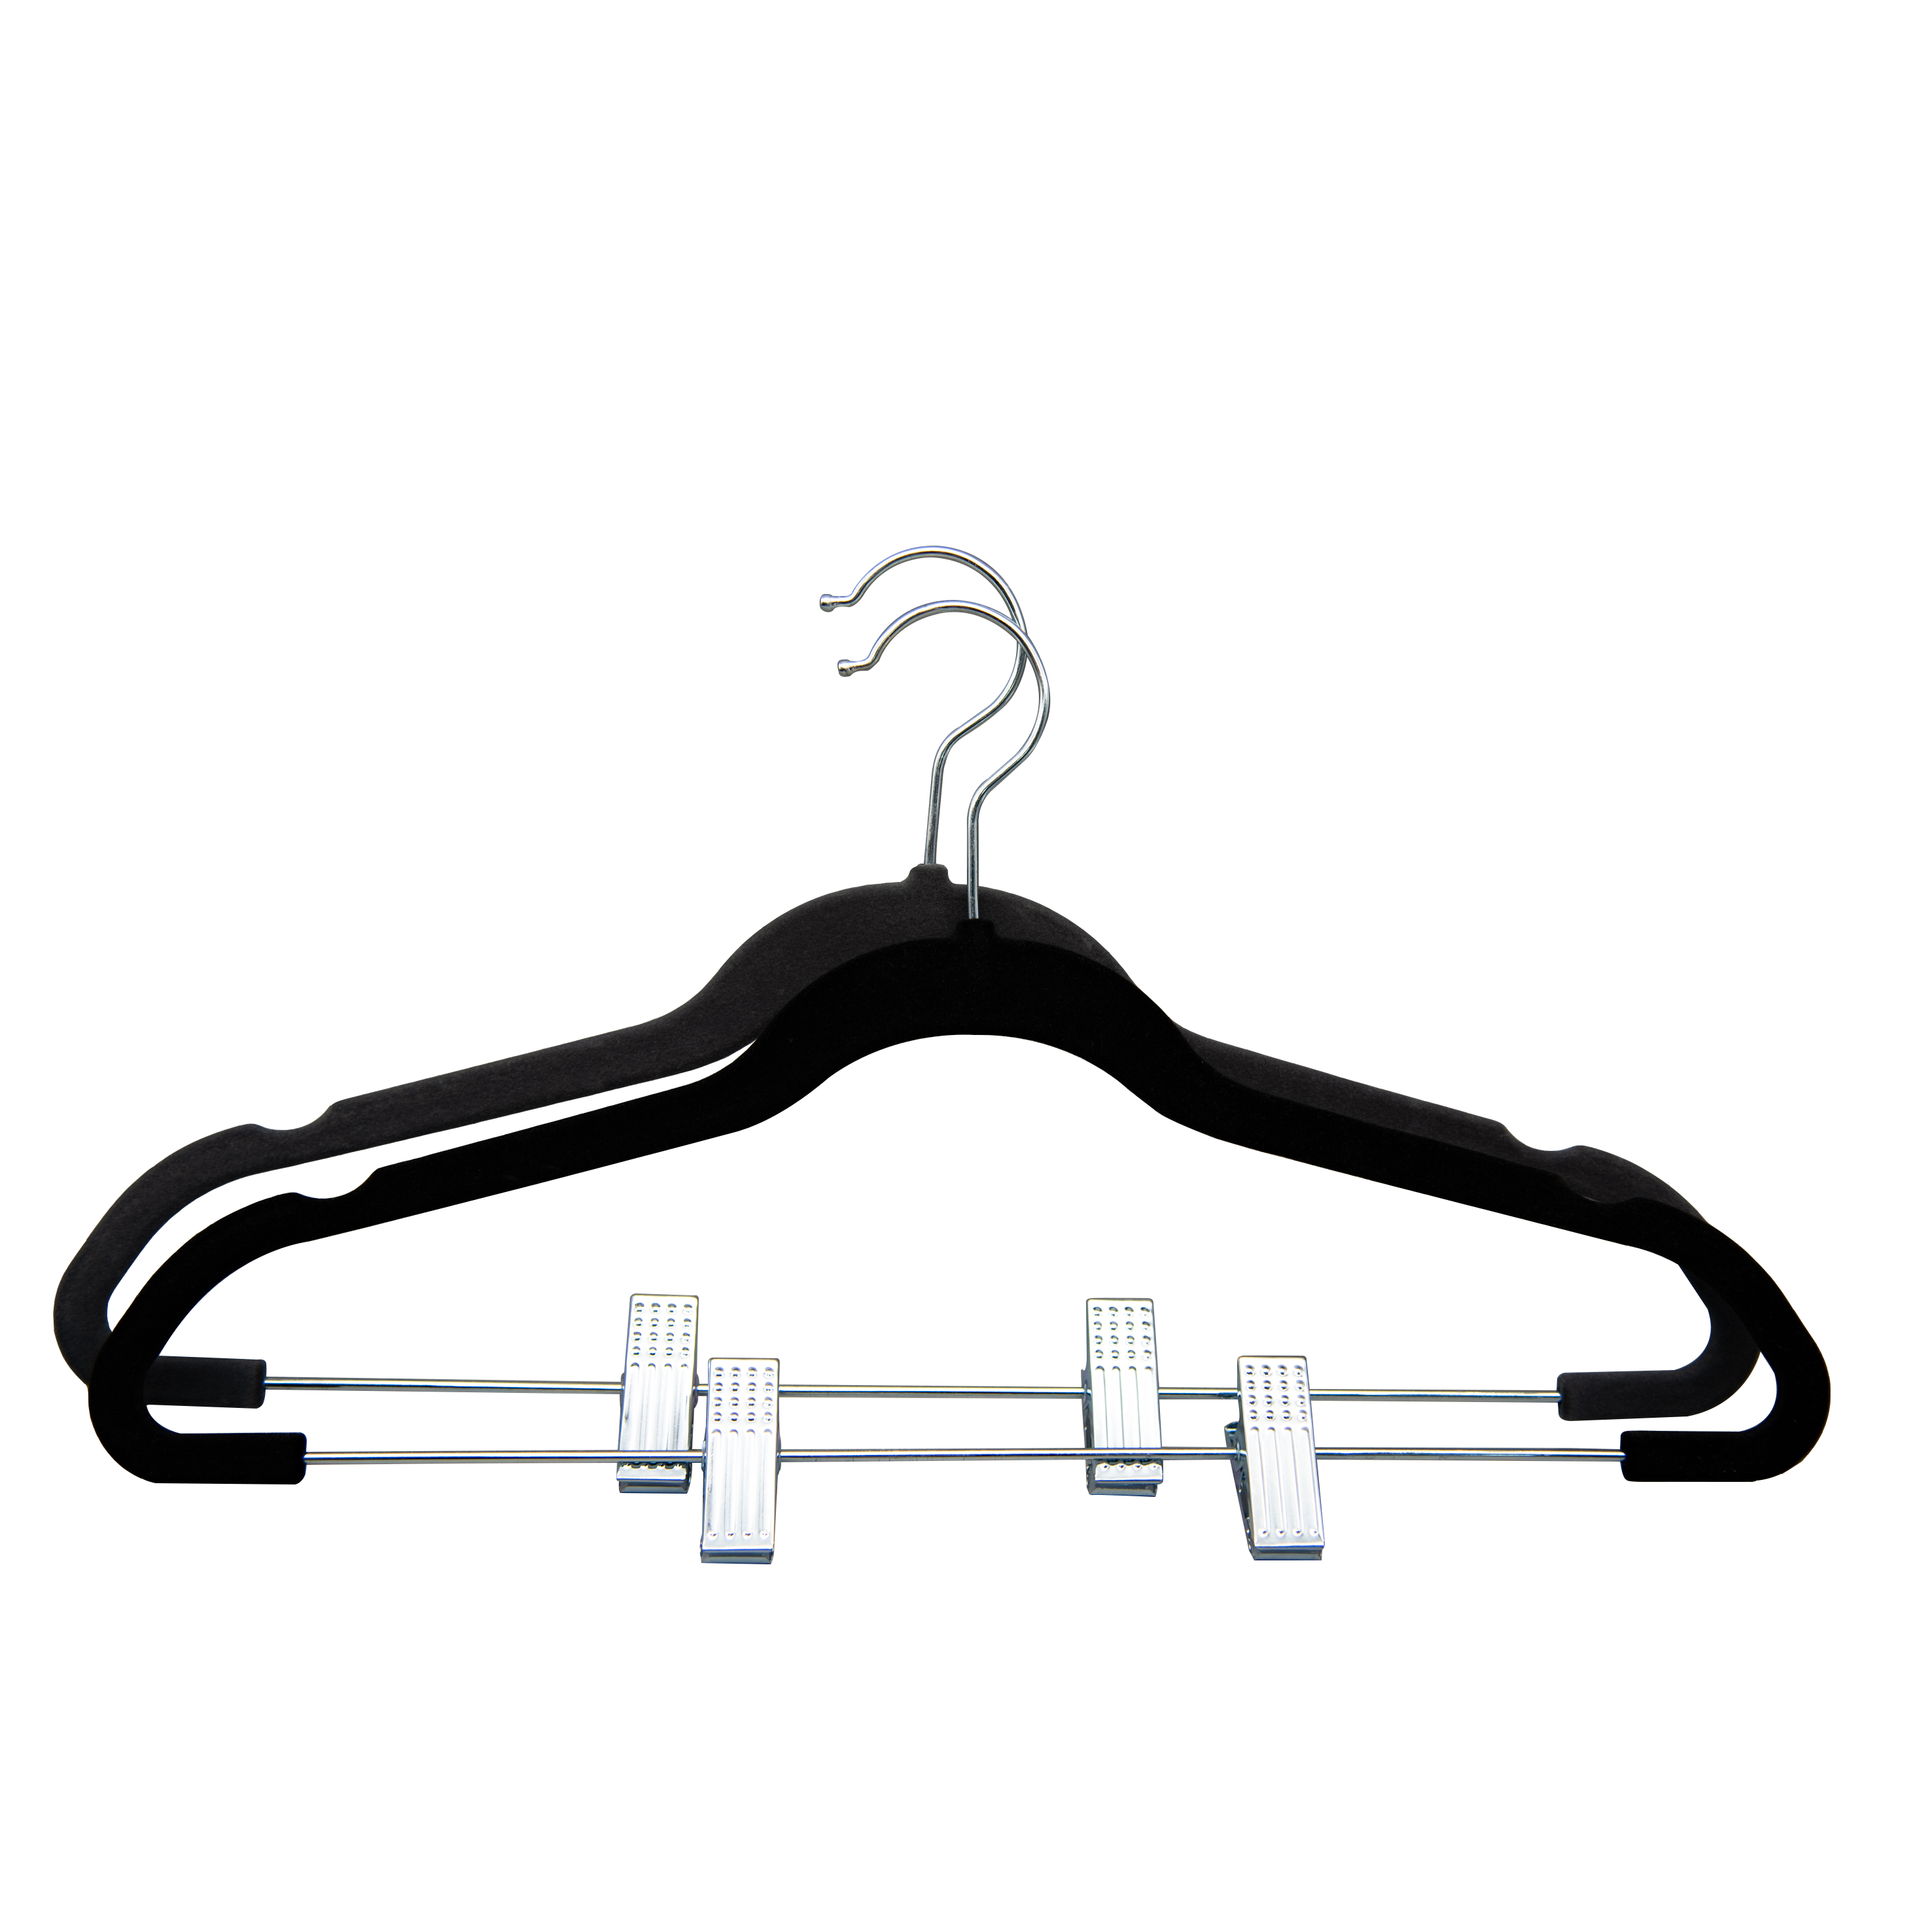 Plastic clothes hangers are commonly used items for organizing and storing clothing in homes